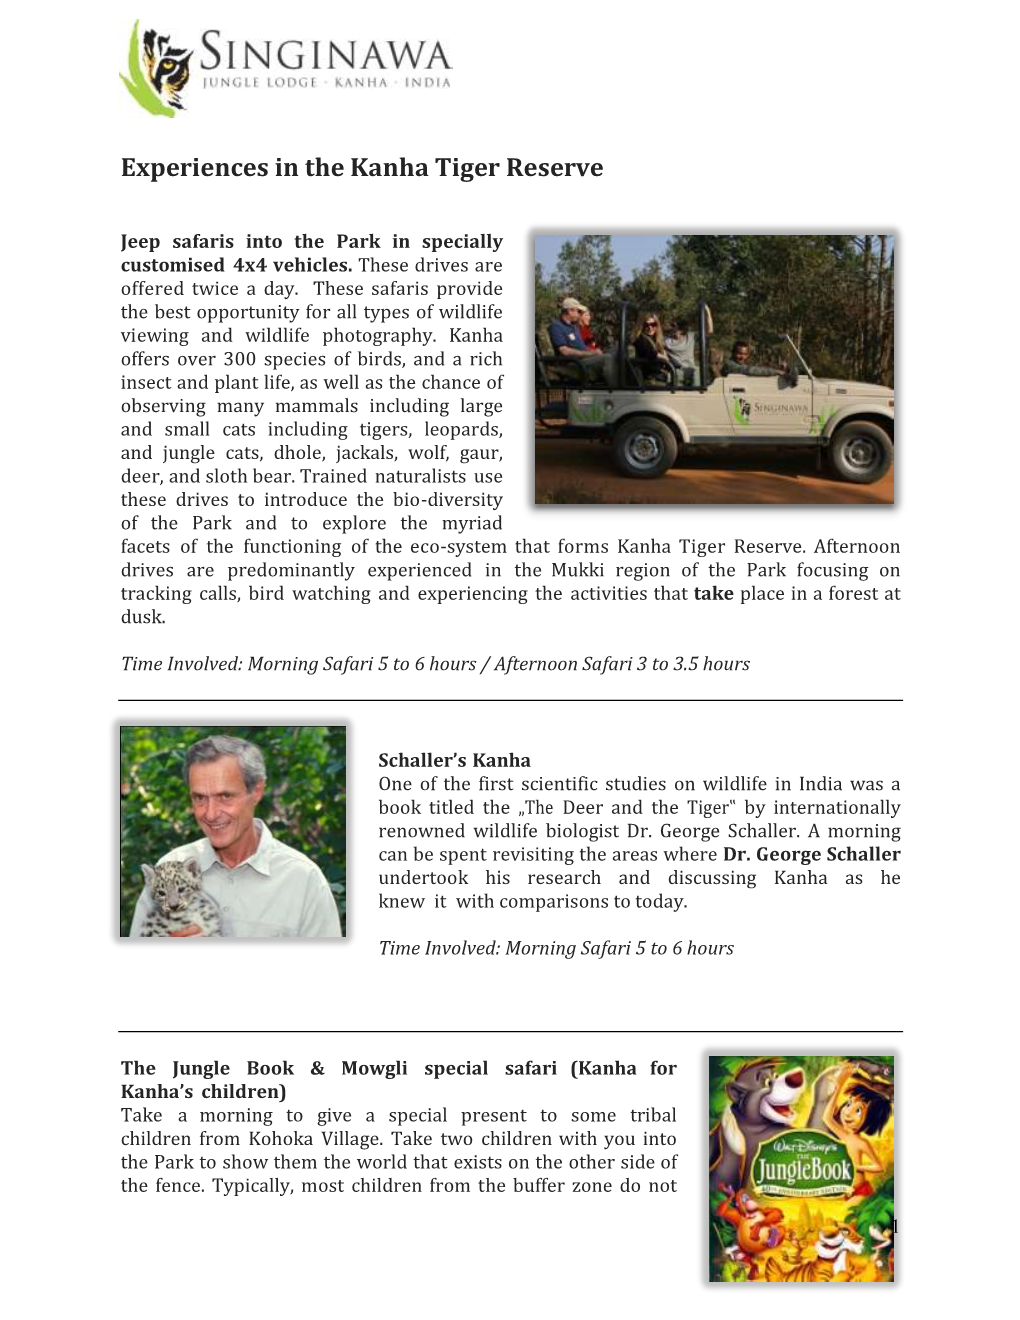 Experiences in the Kanha Tiger Reserve